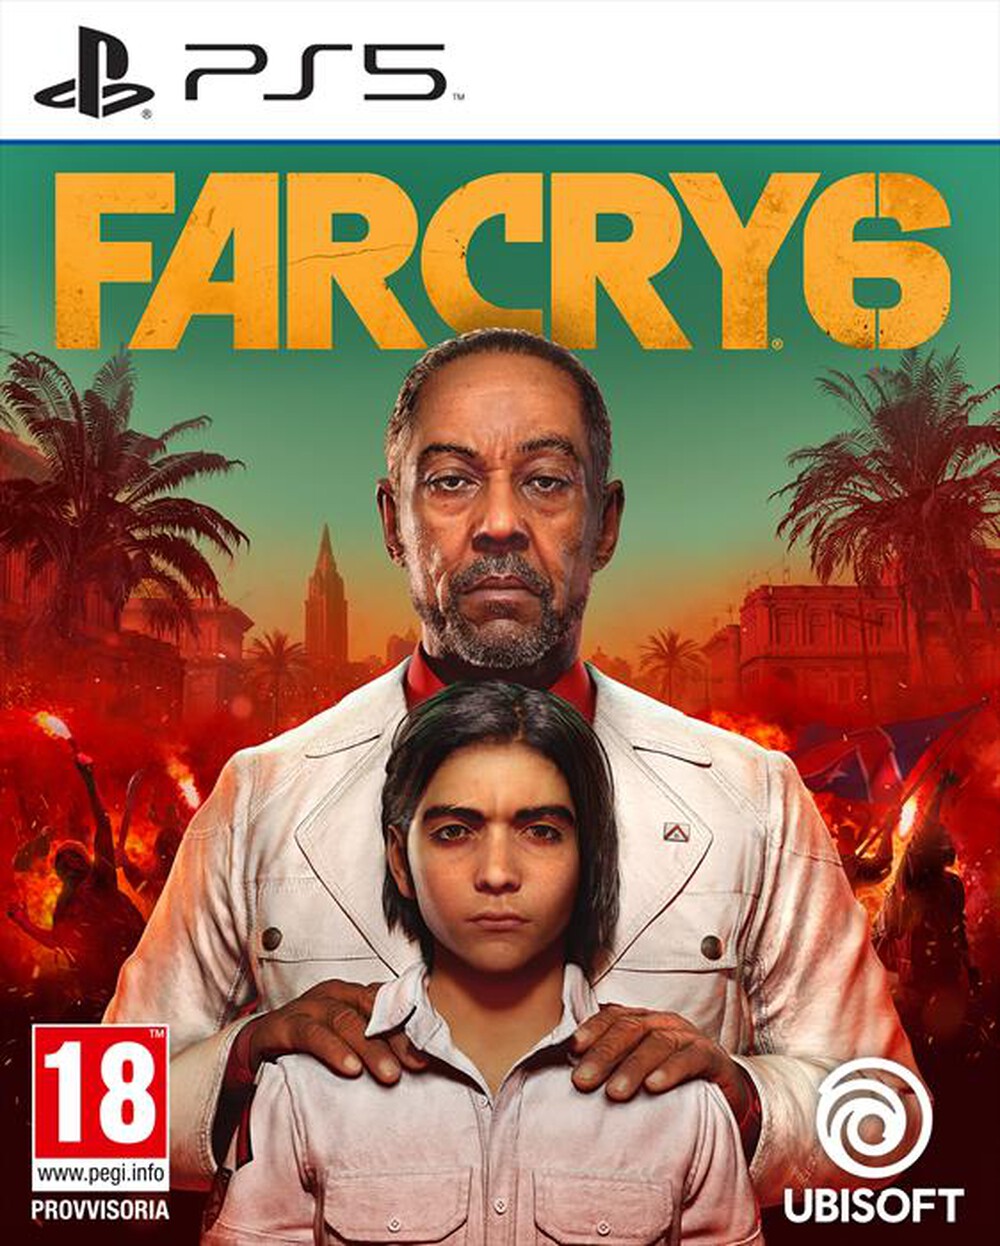 "UBISOFT - FAR CRY 6 PS5"